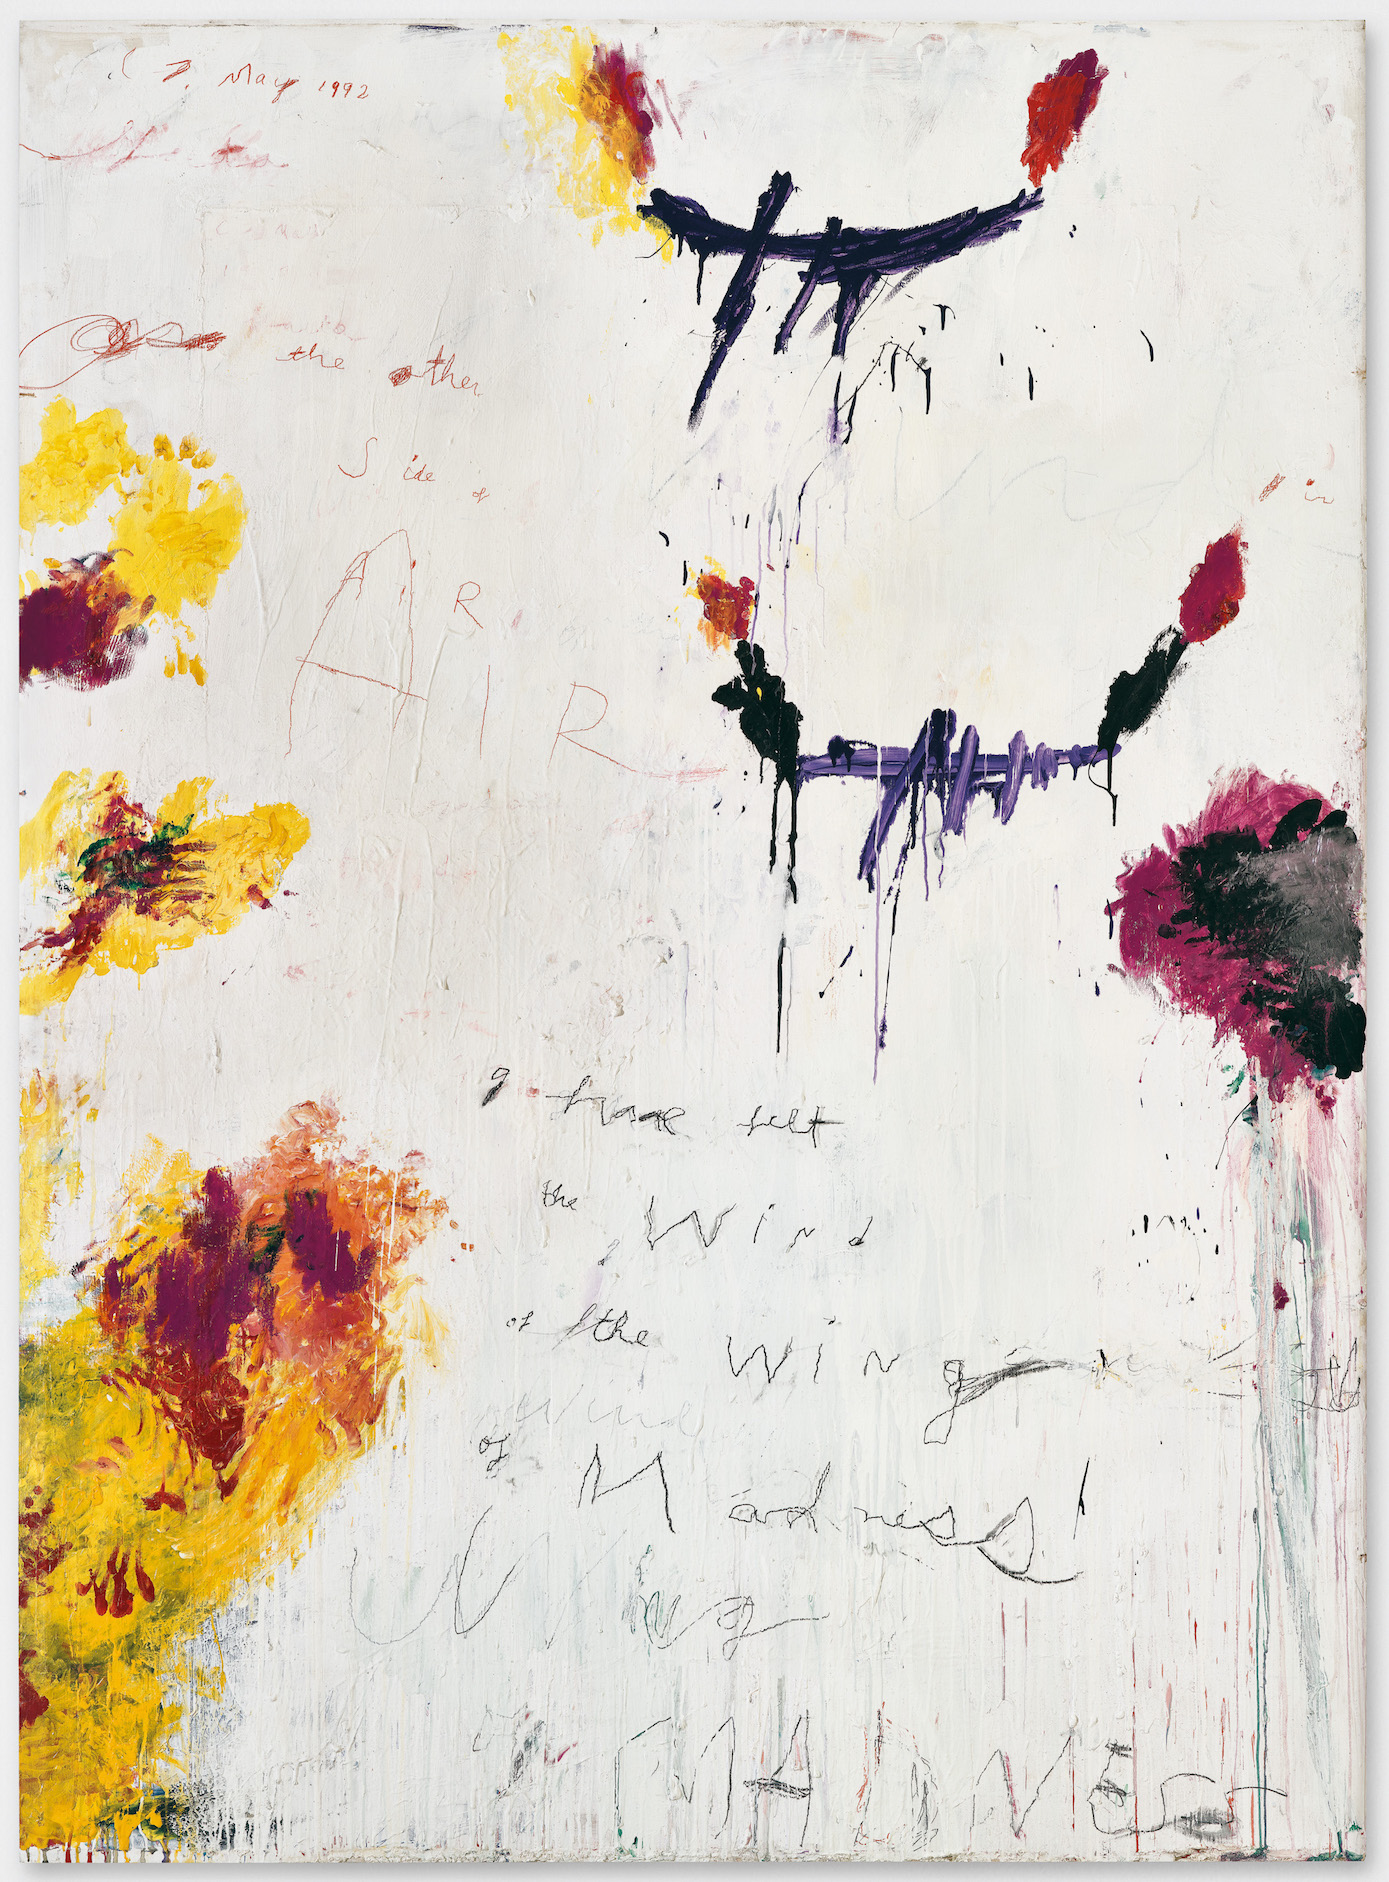 Cy Twombly, Untitled, 1992. Courtesy: Cy Twombly Foundation